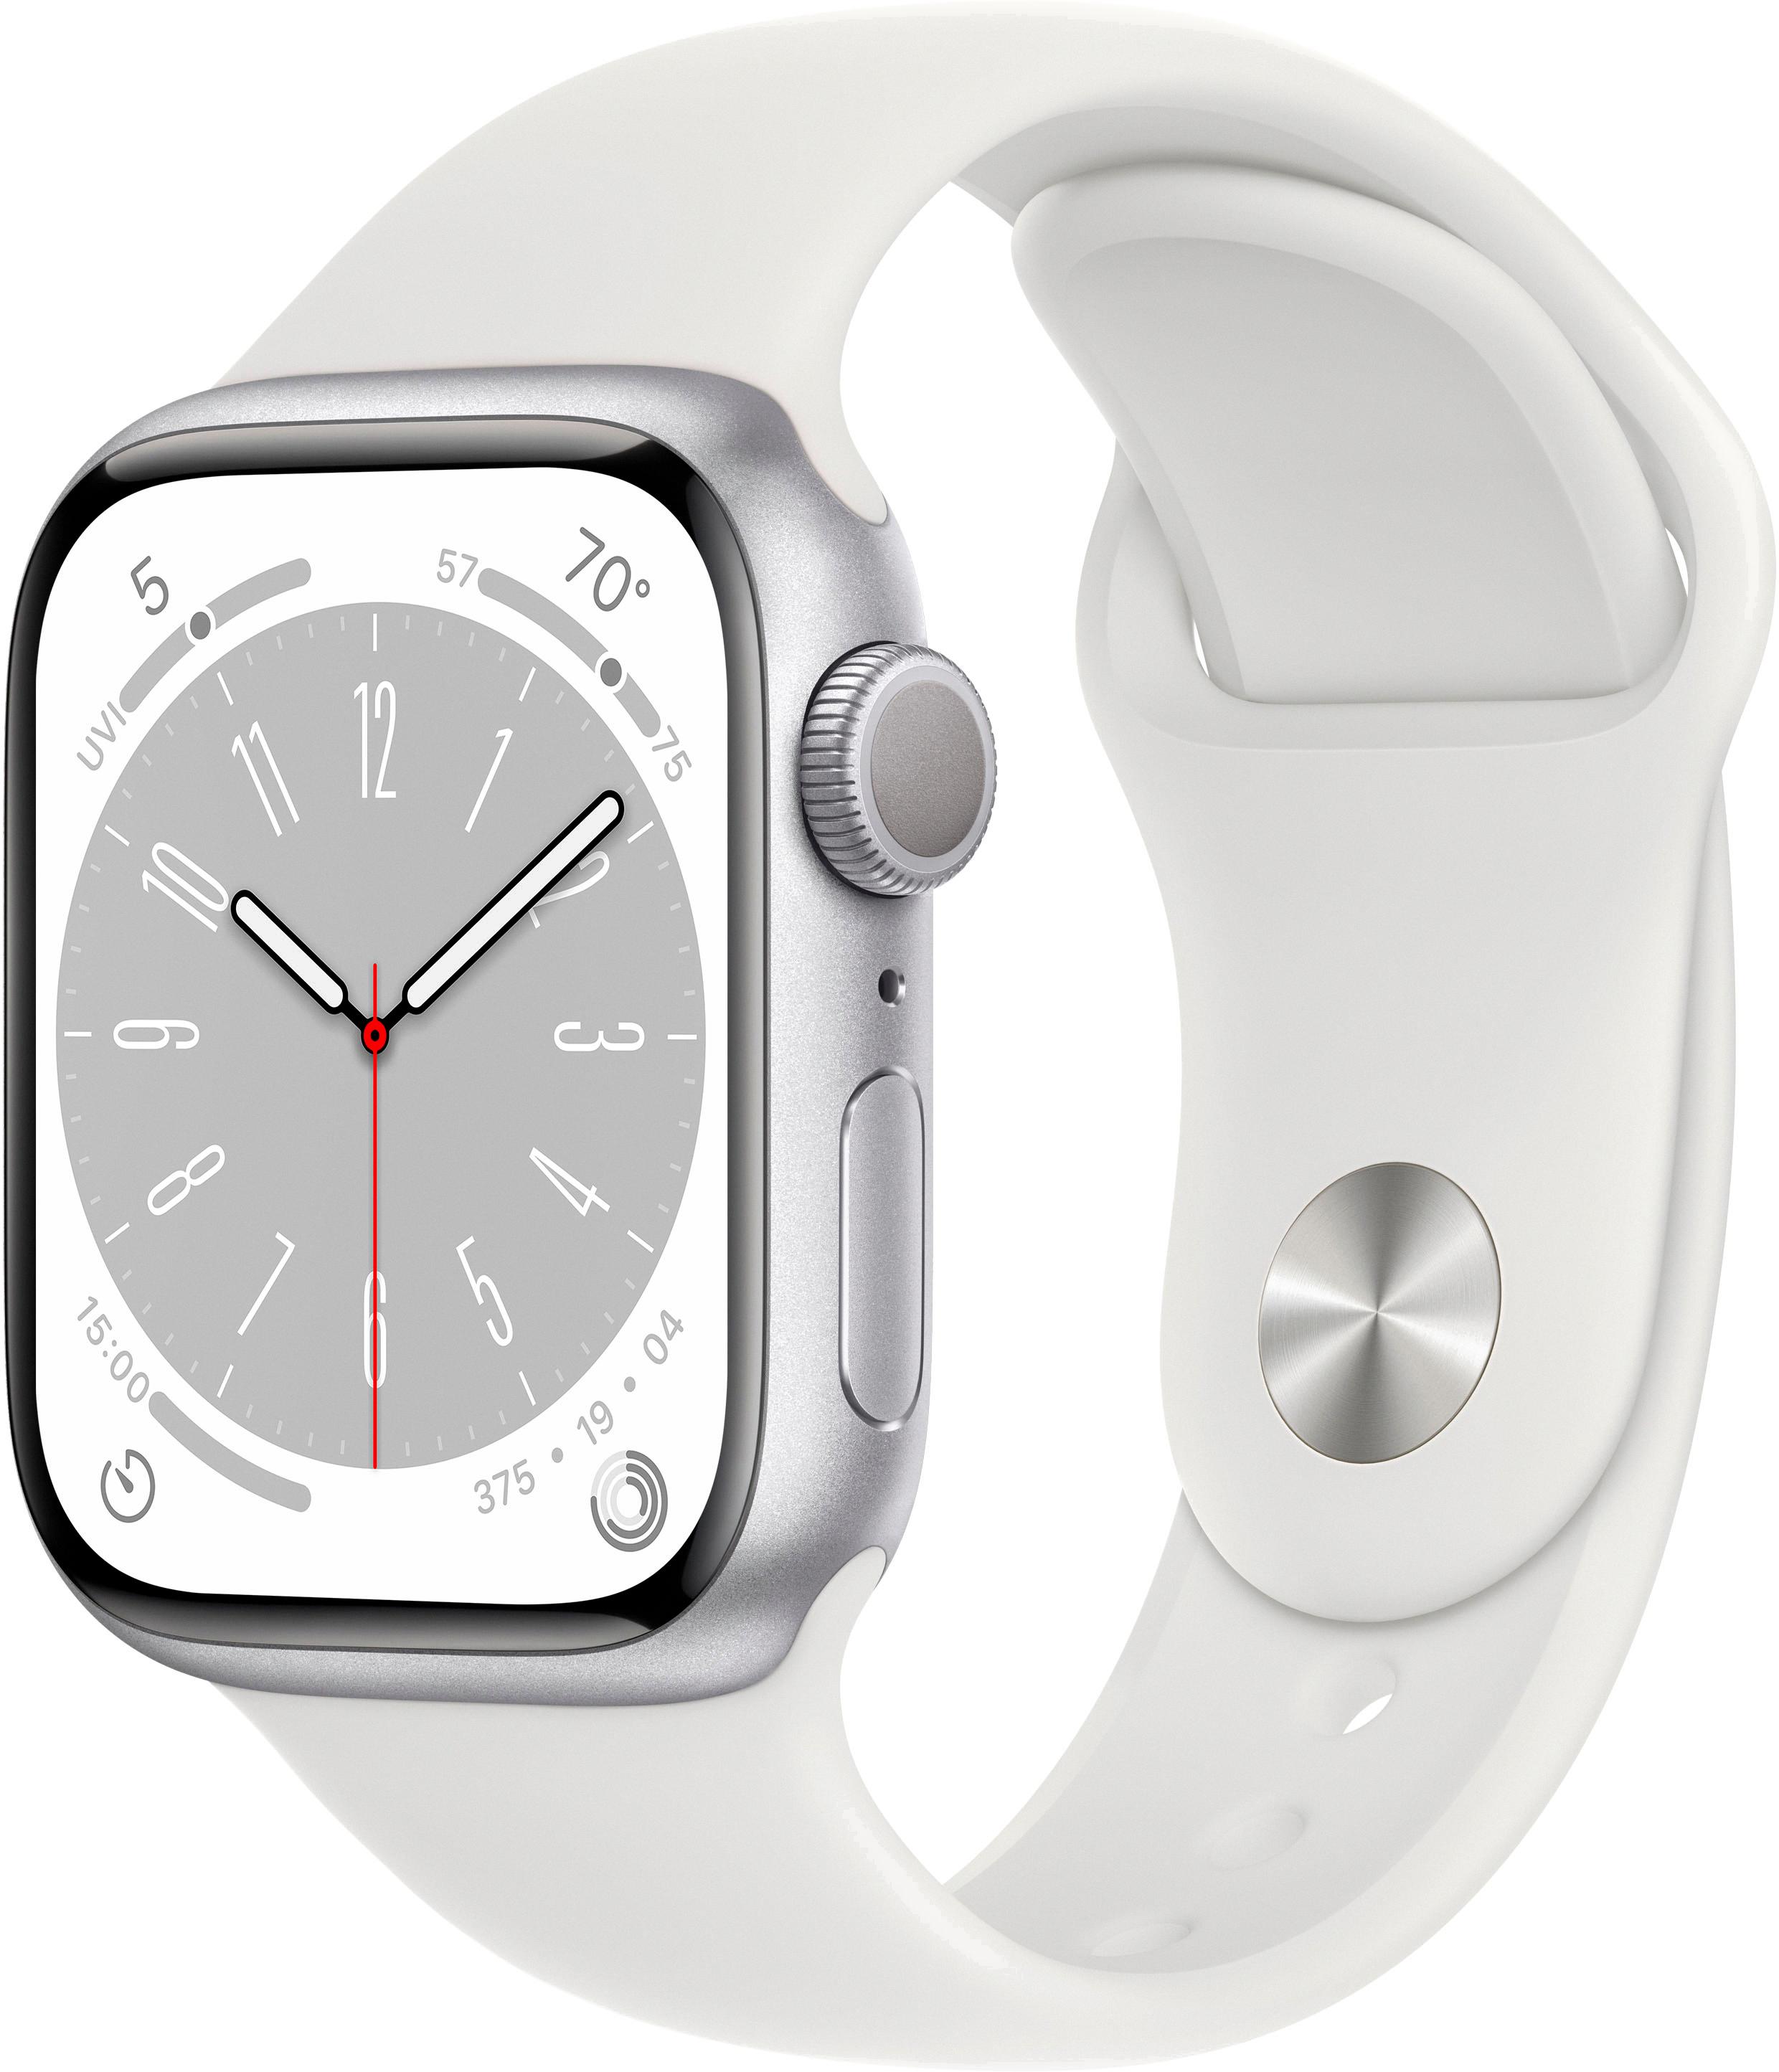 How to Set Up an Apple Watch Alarm to Vibrate Only 3